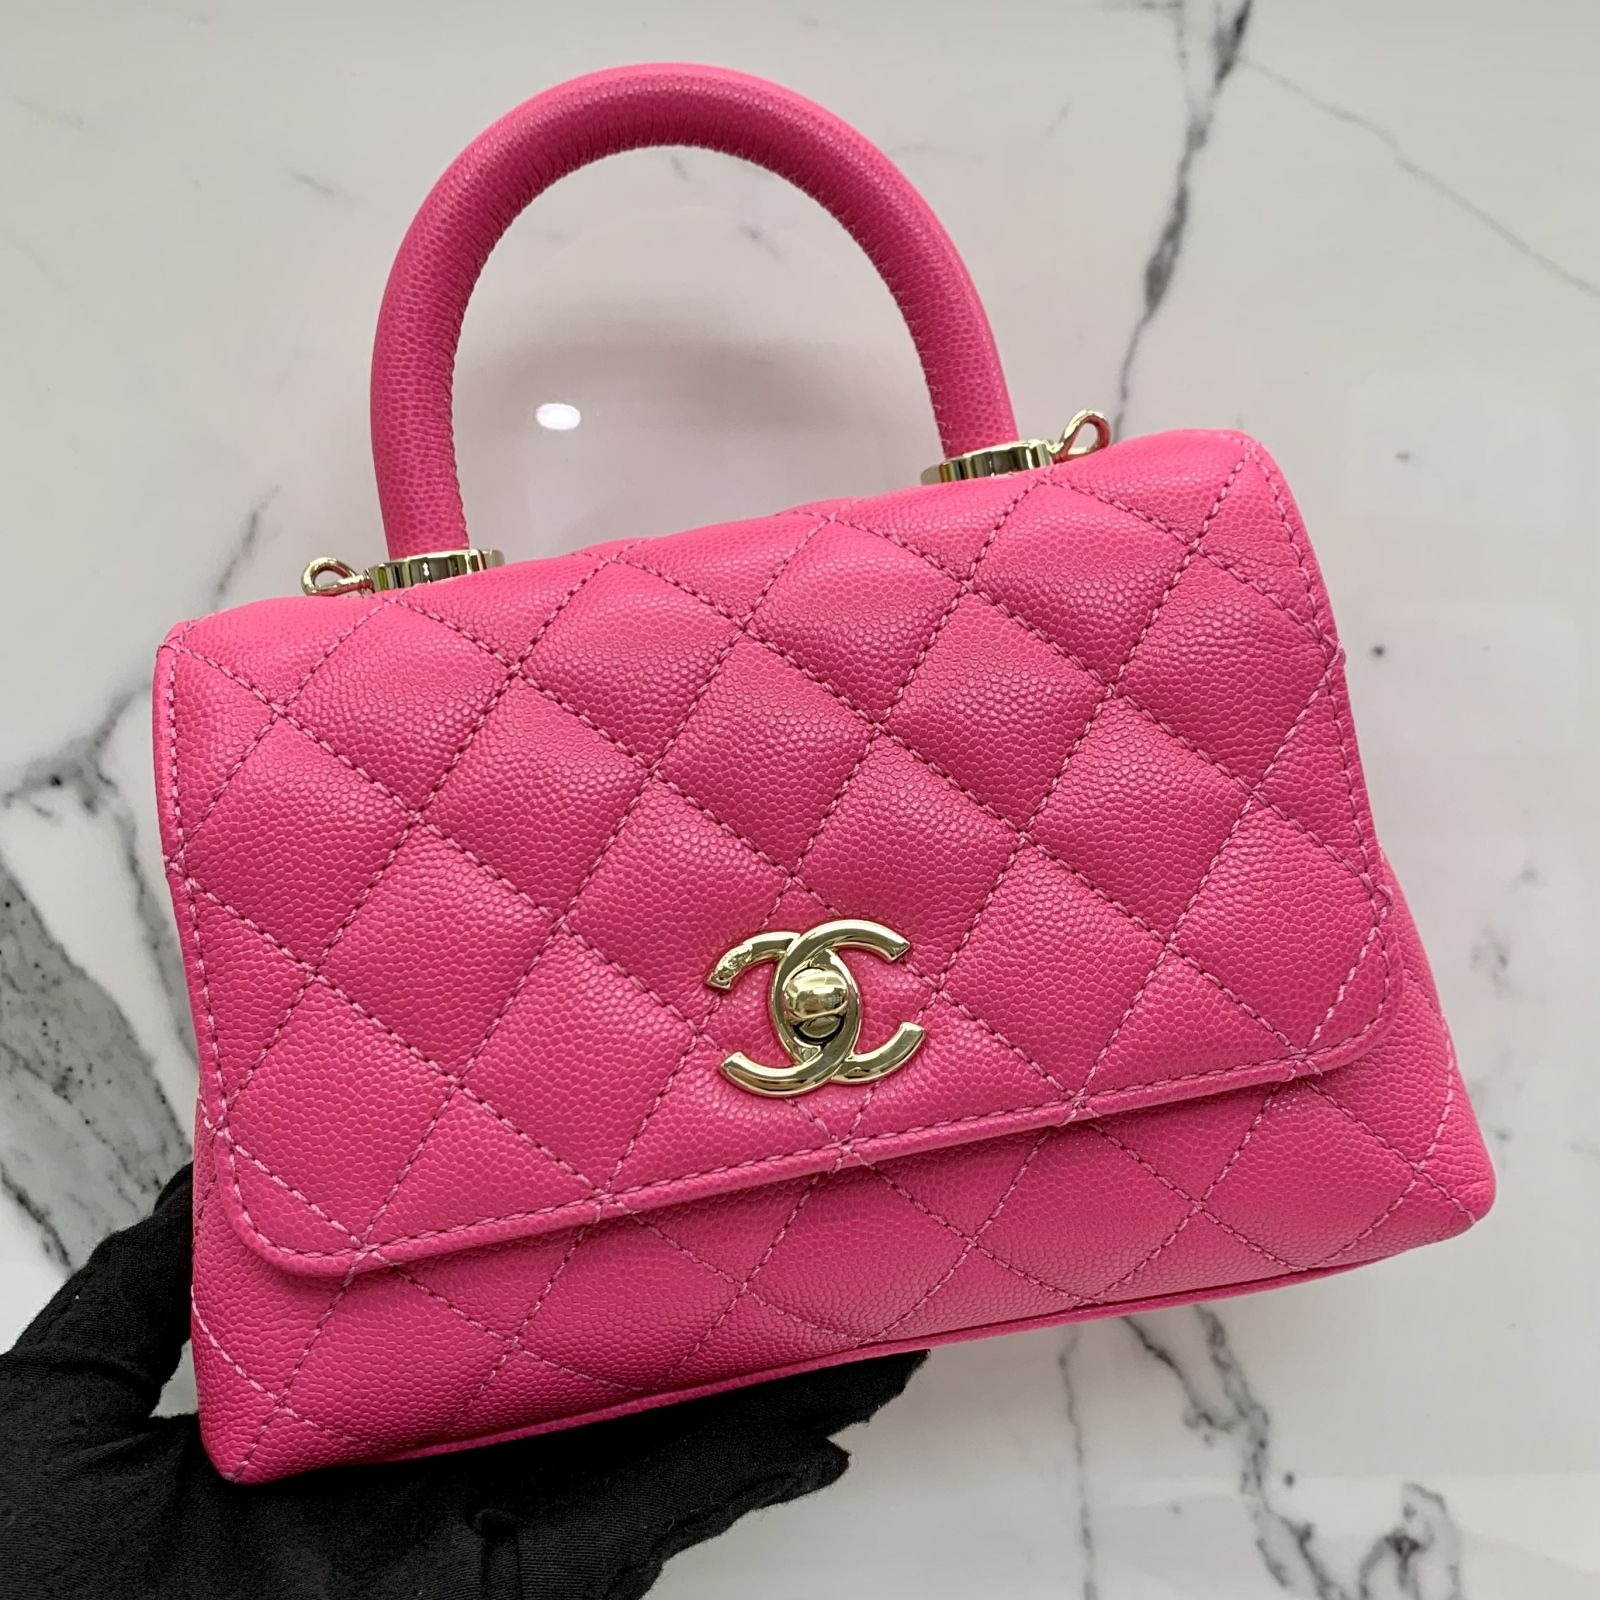 CHANEL CHANEL Matelasse Coco Handle Chain Shoulder Bag A92990 Caviar  leather Pink Used A92990